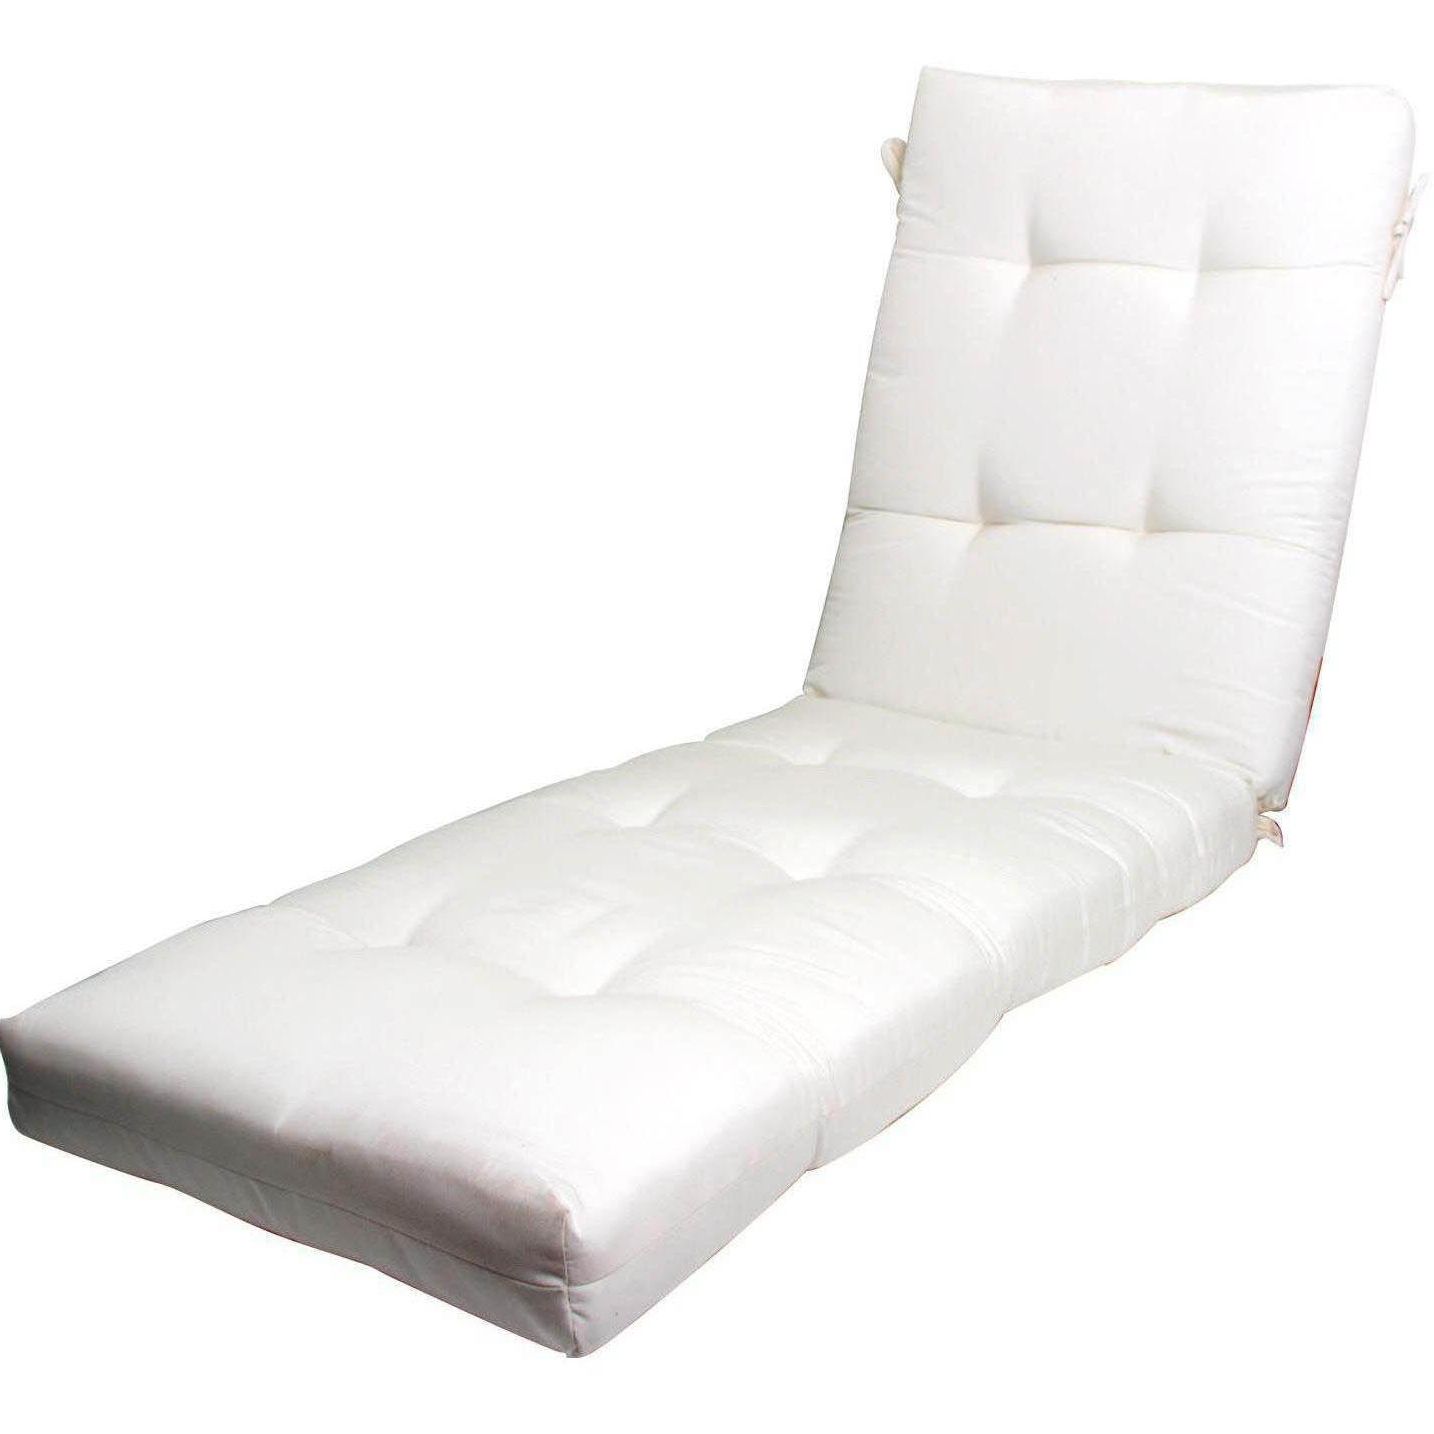 Sunbrella Canvas Natural Extra Long Outdoor Replacement Chaise With Favorite Outdoor Chaise Cushions (View 2 of 15)